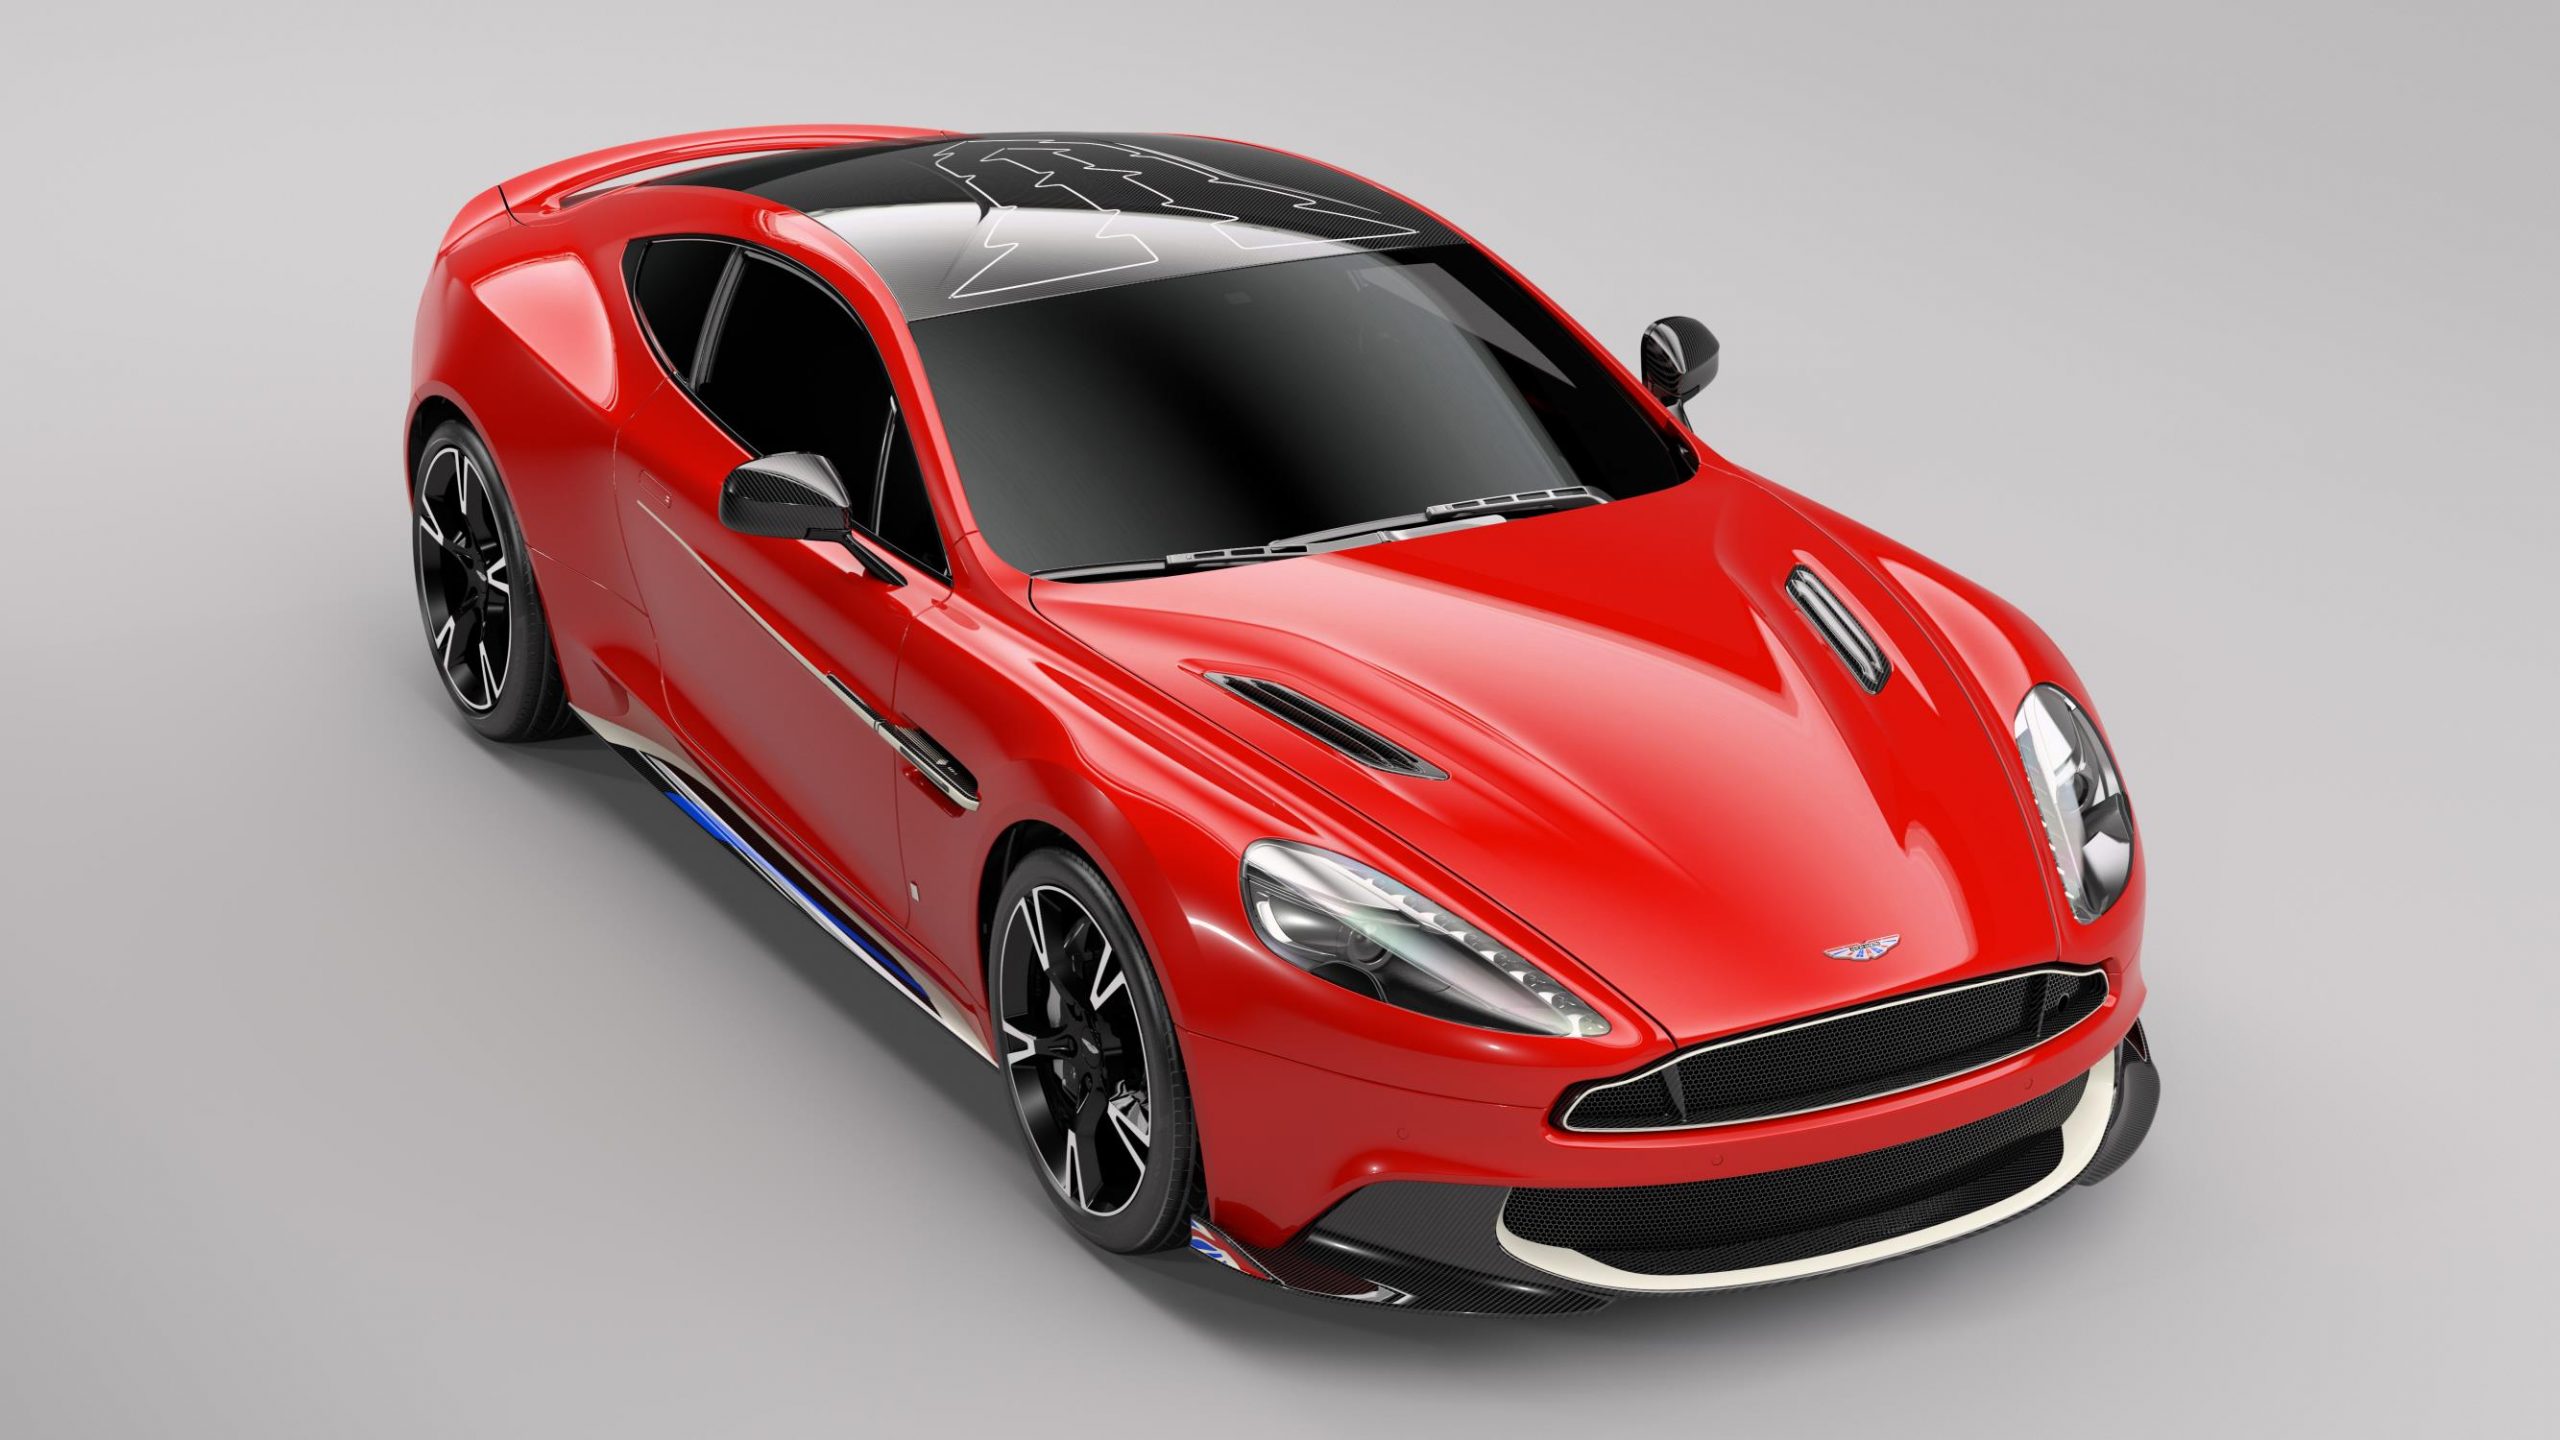 Aston Martin Vanquish S Red Arrows special edition announced